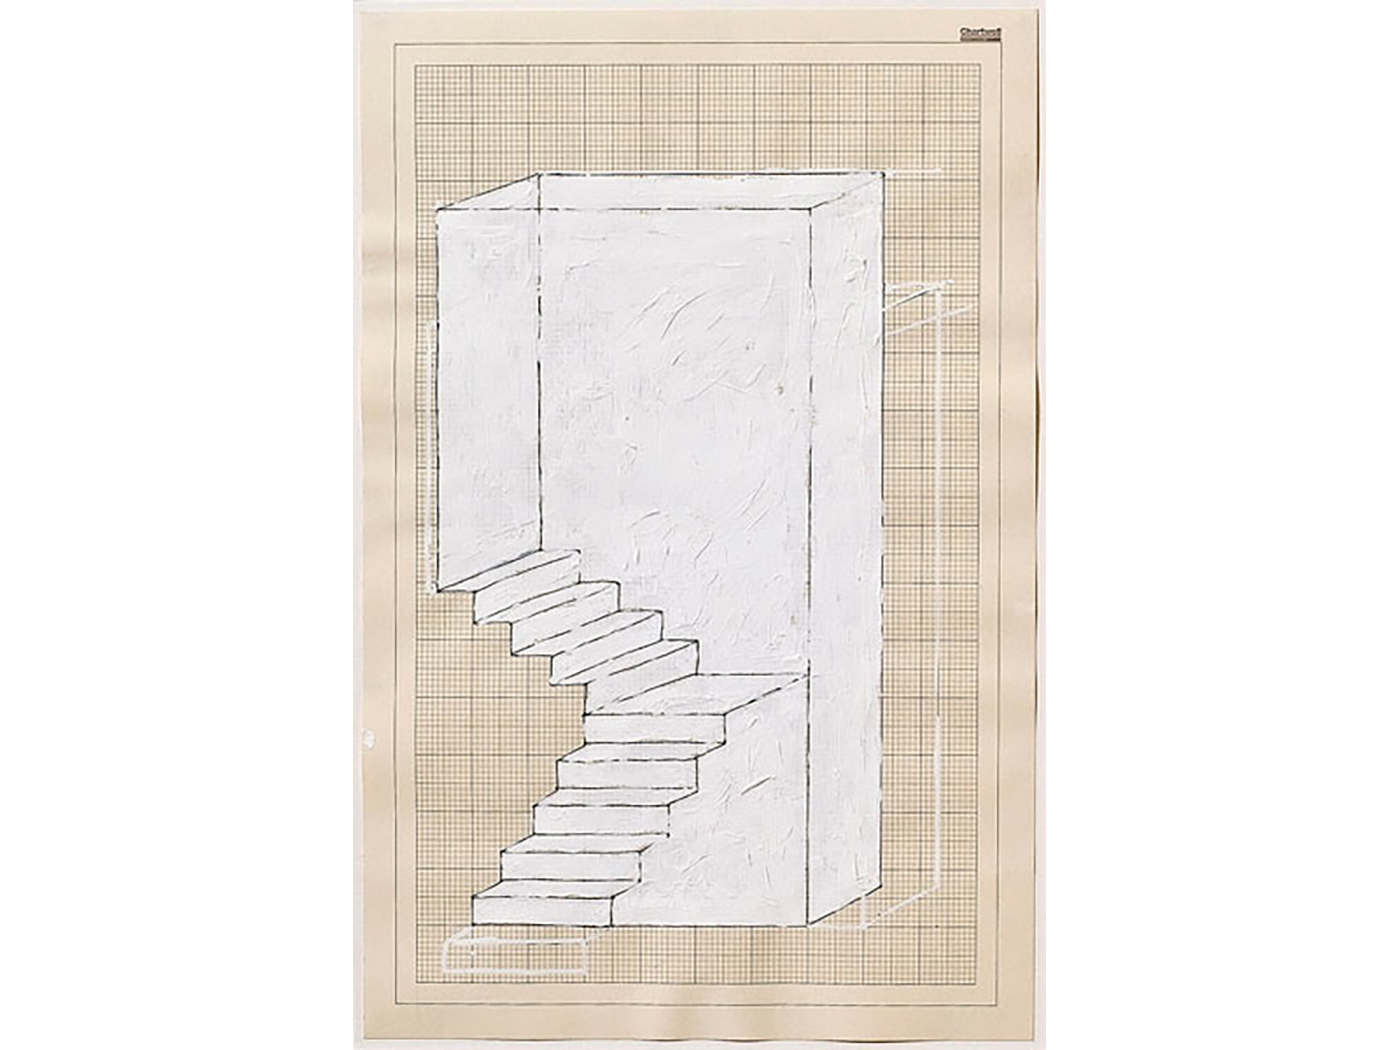 Dog, Leg Stair' (1995), Correction fluid and ink on graph paper, 45.5 x 30 cm